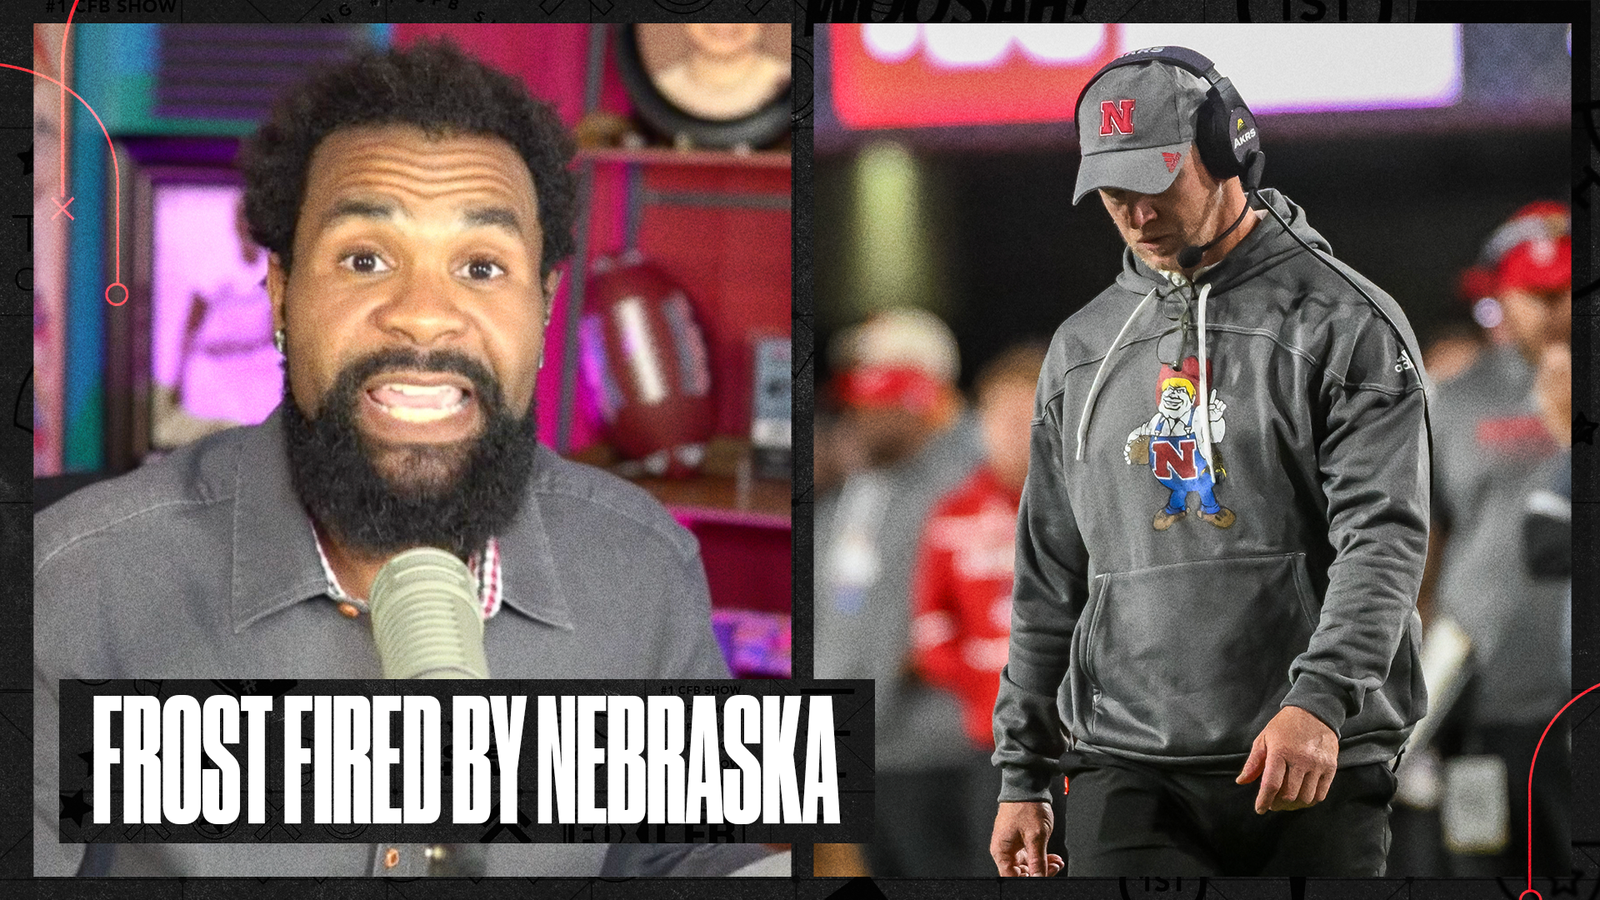 Nebraska shoots Scott Frost and what that means for the future of the Cornhuskers |  The number one CFB Show